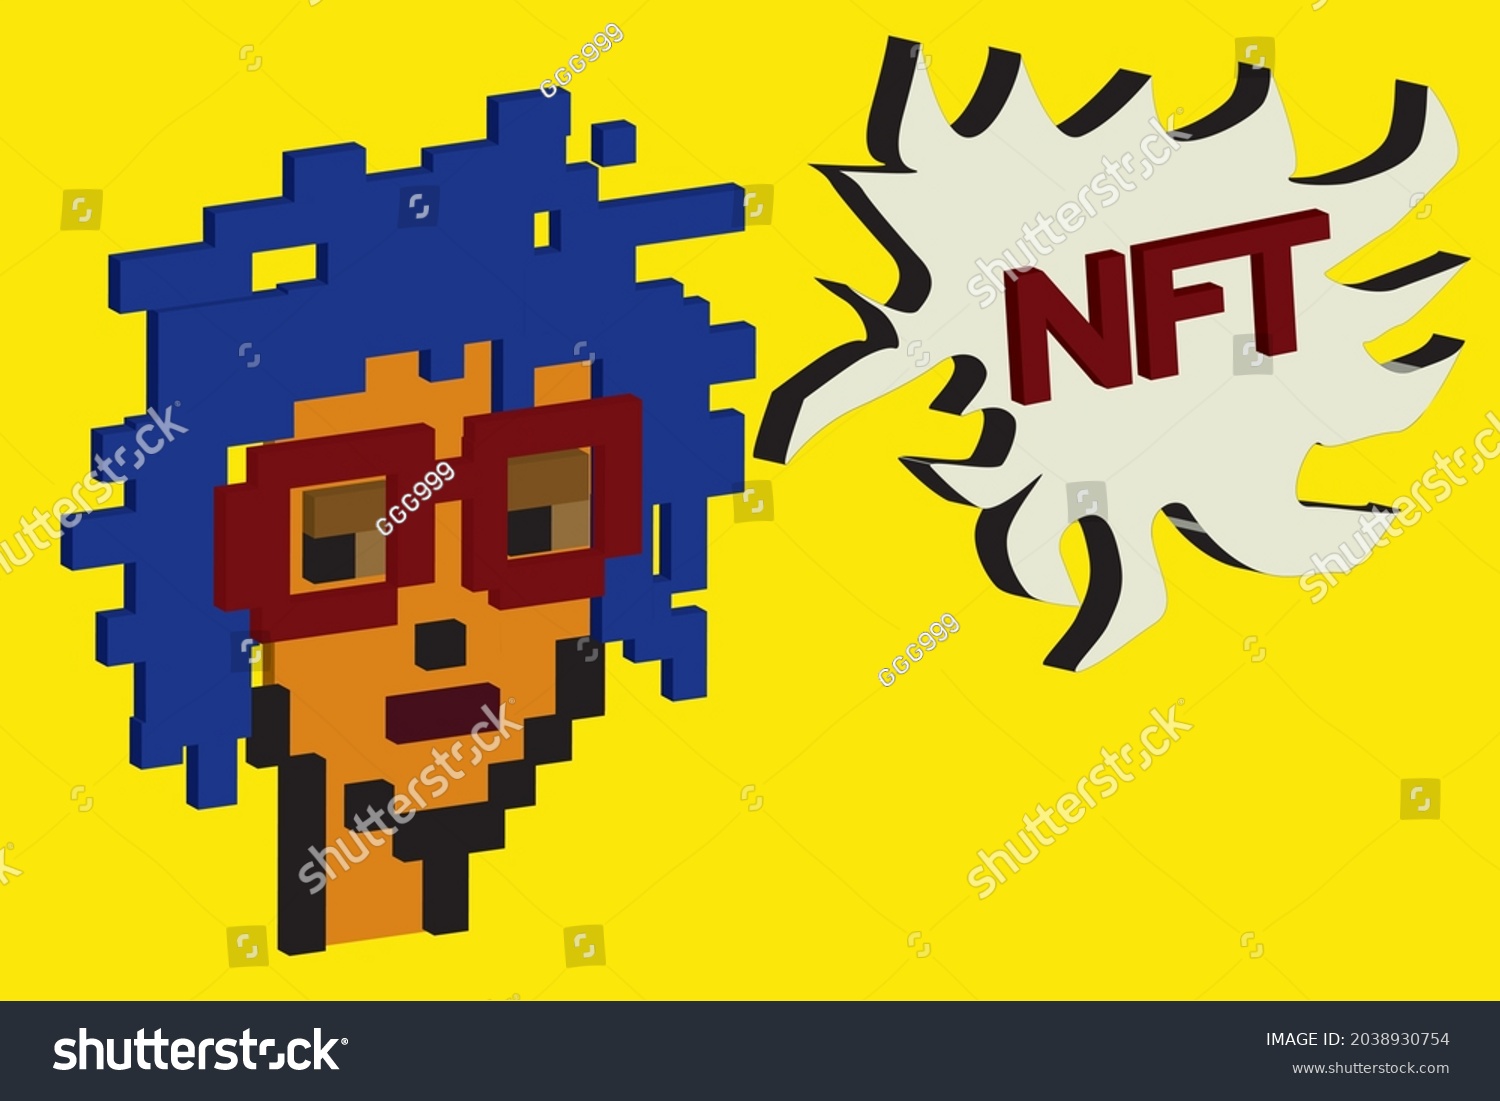 SVG of Cryptopunk NFT blockchain, non fungible token. Pixel art character blue hair red glasses 3d svg